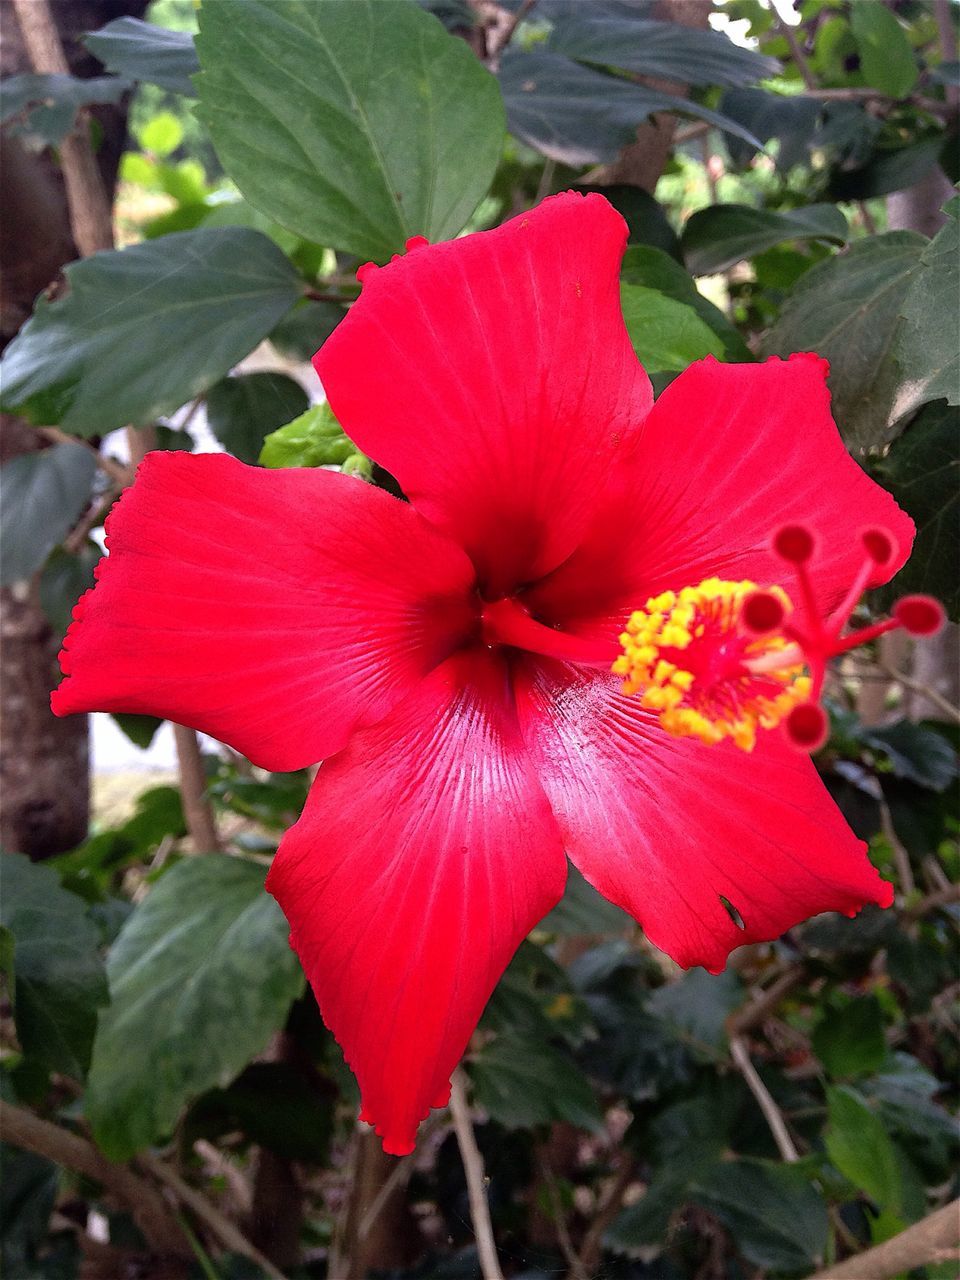 flower, petal, freshness, flower head, red, fragility, growth, close-up, beauty in nature, blooming, focus on foreground, leaf, plant, nature, stamen, single flower, pollen, hibiscus, in bloom, day